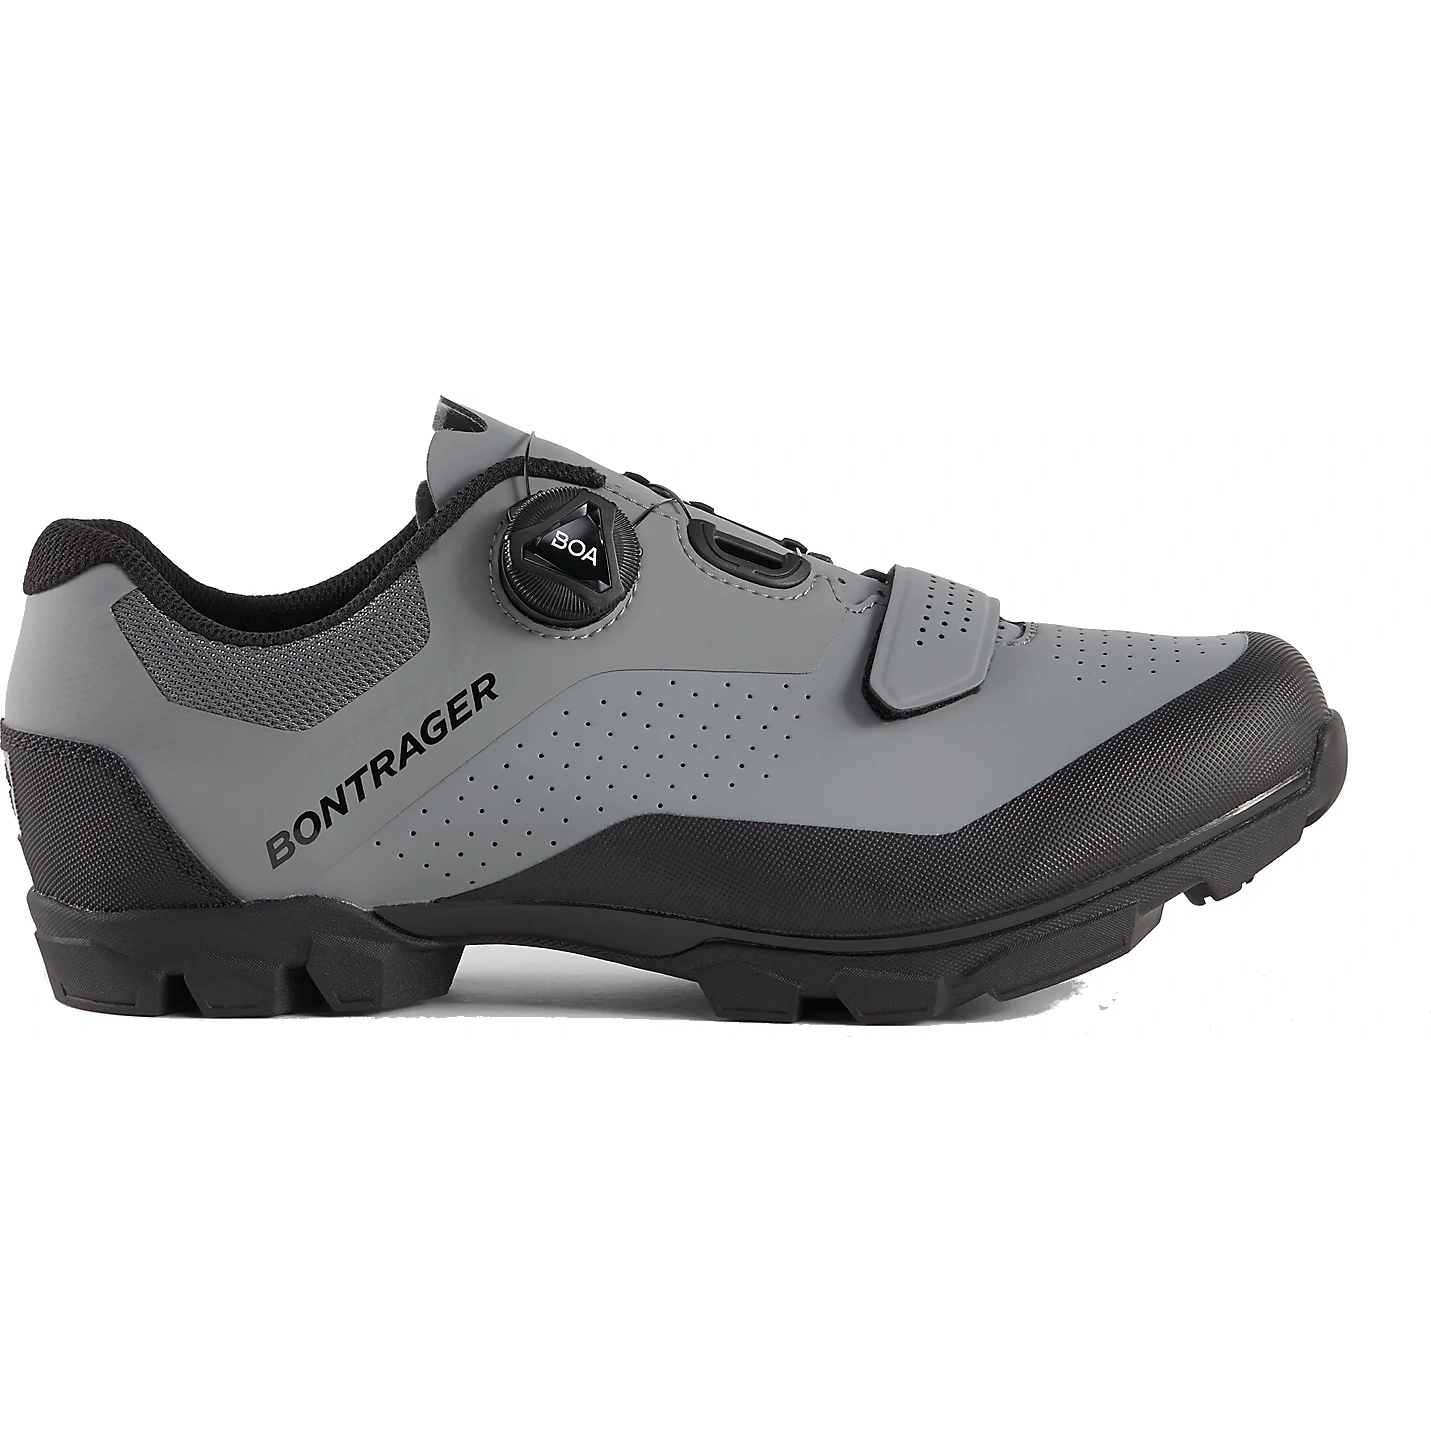 Picture of Bontrager Foray Mountainbike Shoe - quicksilver / black